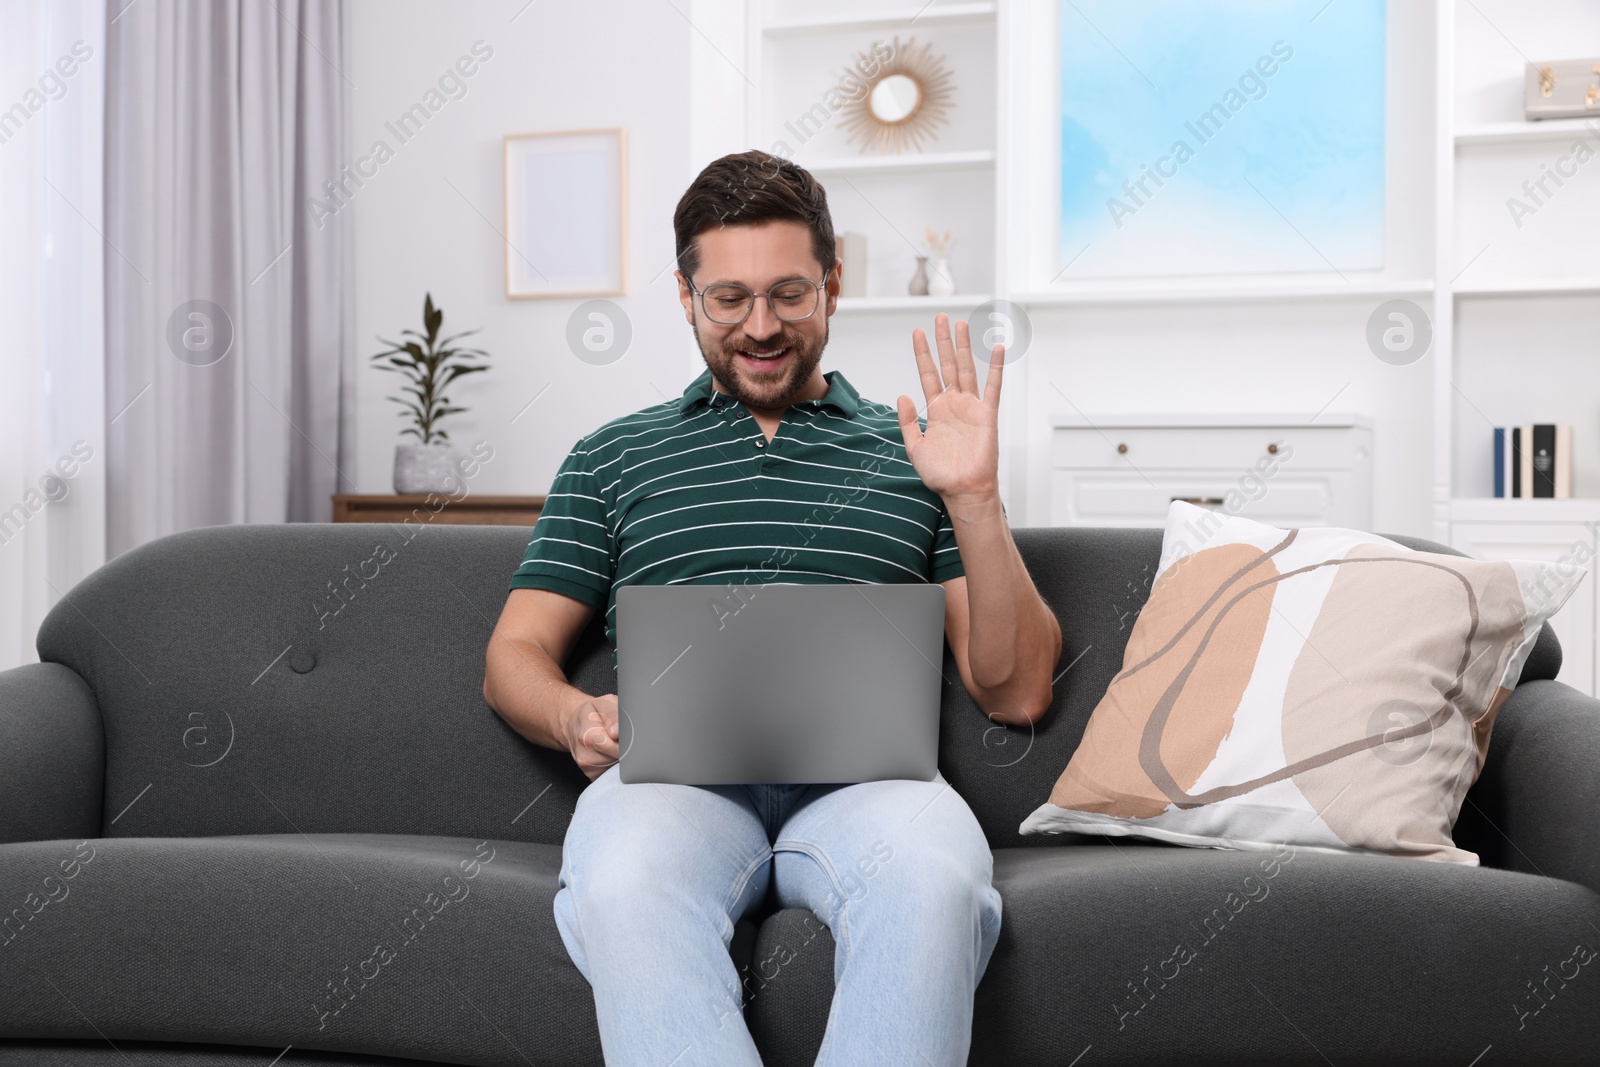 Photo of Happy man greeting someone during video chat via laptop at home